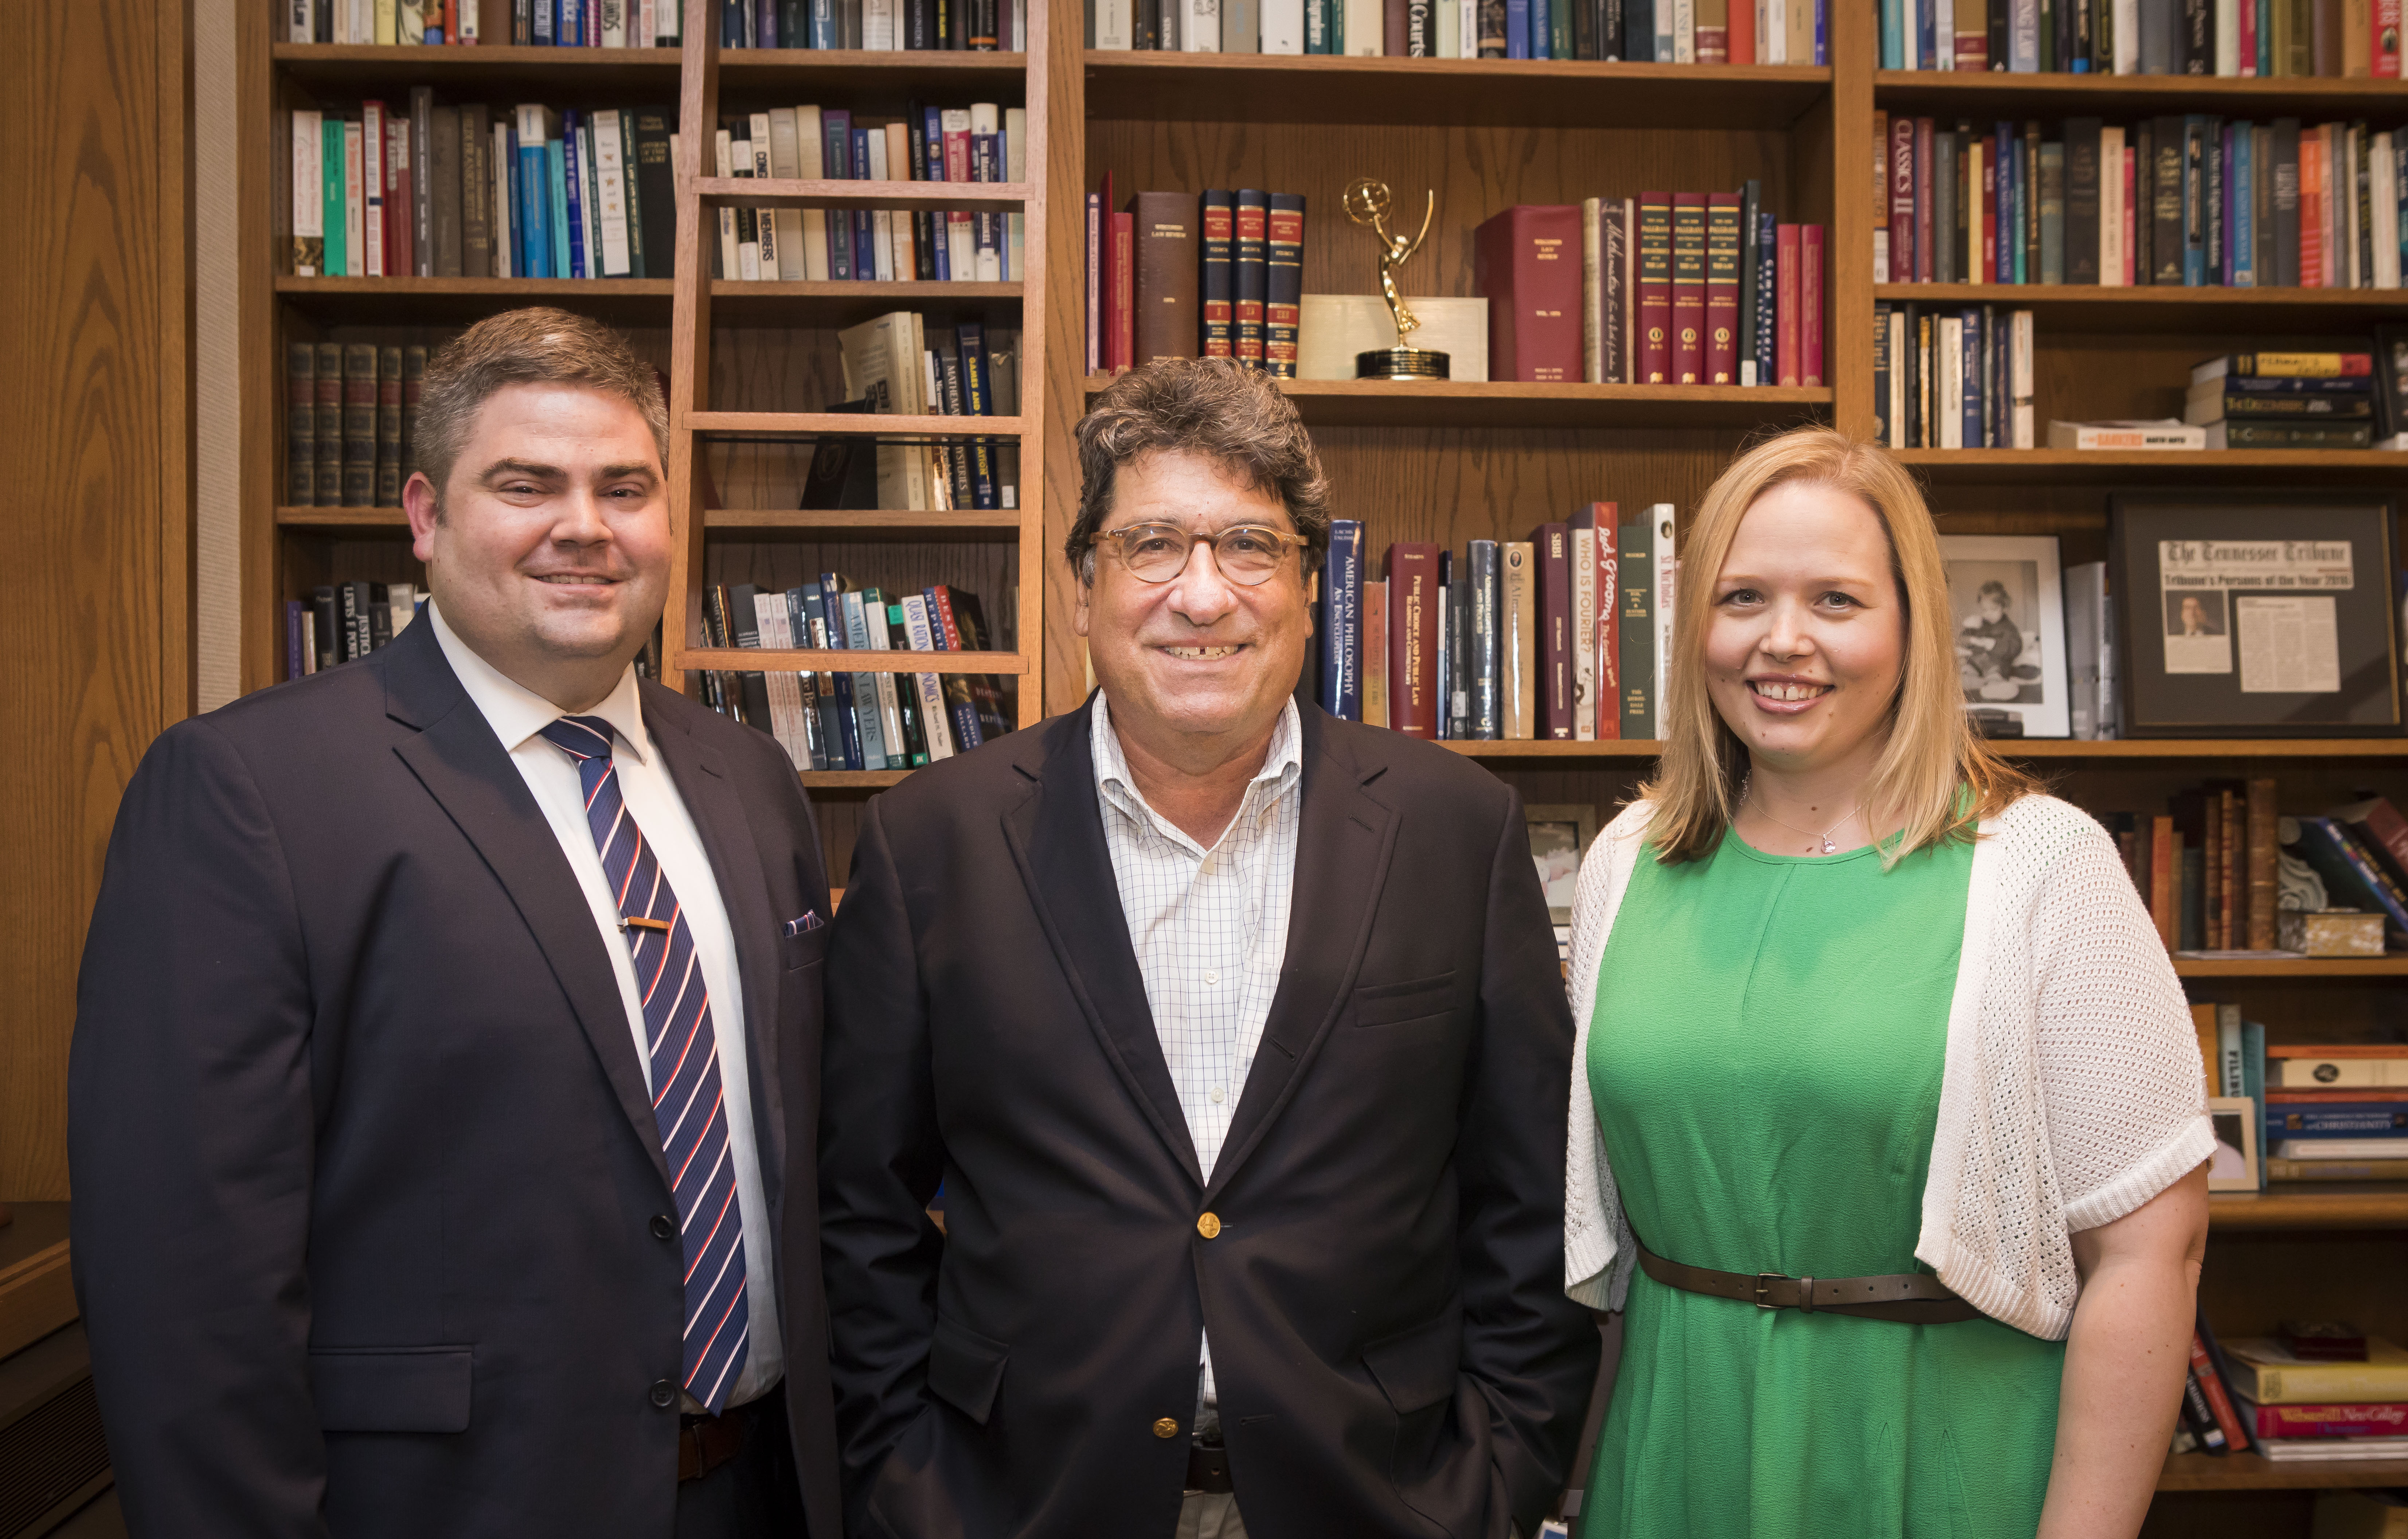 Chancellor Nicholas S. Zeppos stands in between Michael Pring and Jenny Mandeville.